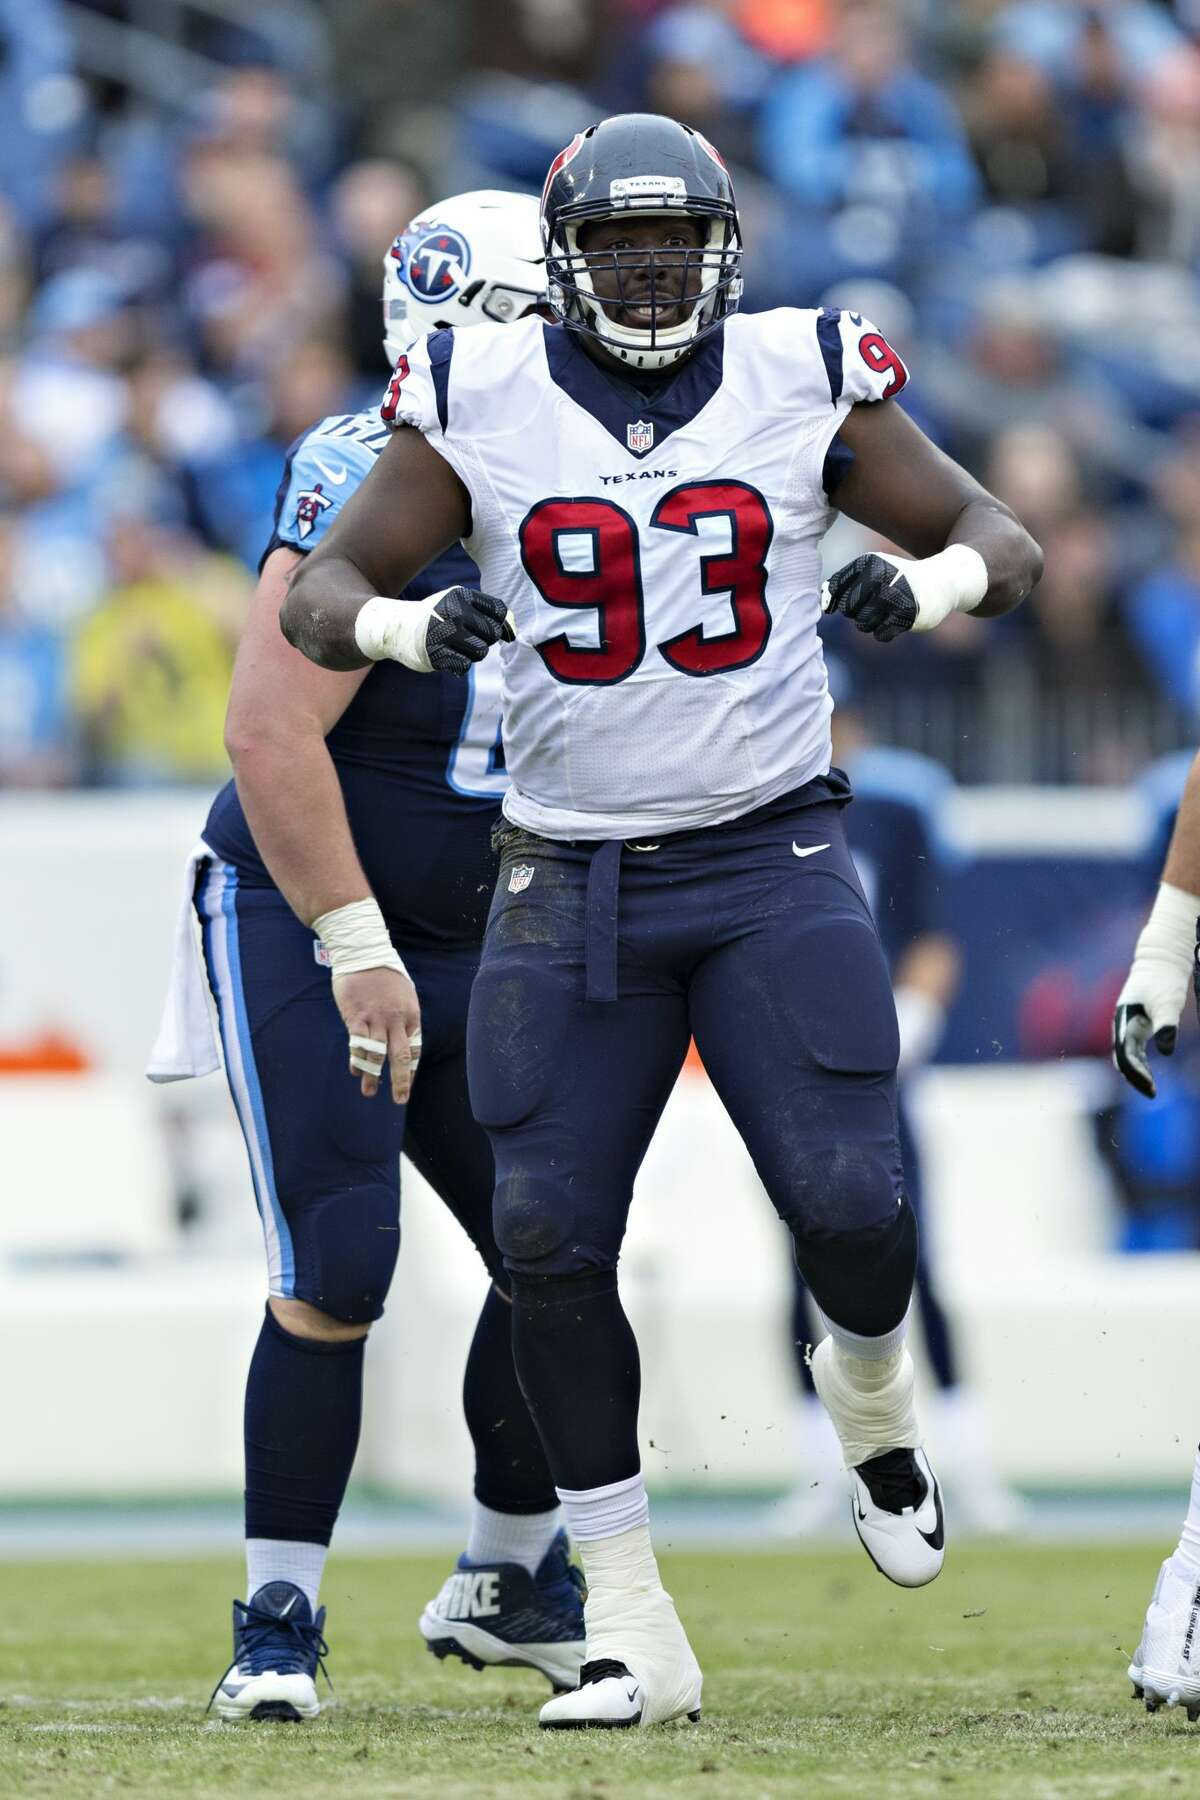 NASHVILLE, TN - JANUARY 1: Joel Heath #93 of the Houston Texans celebrates with a dance after sacking the quarterback during a game against the Tennessee Titans at Nissan Stadium on January 1, 2017 in Nashville, Tennessee. The Titans defeated the Texans 24-17. (Photo by Wesley Hitt/Getty Images)